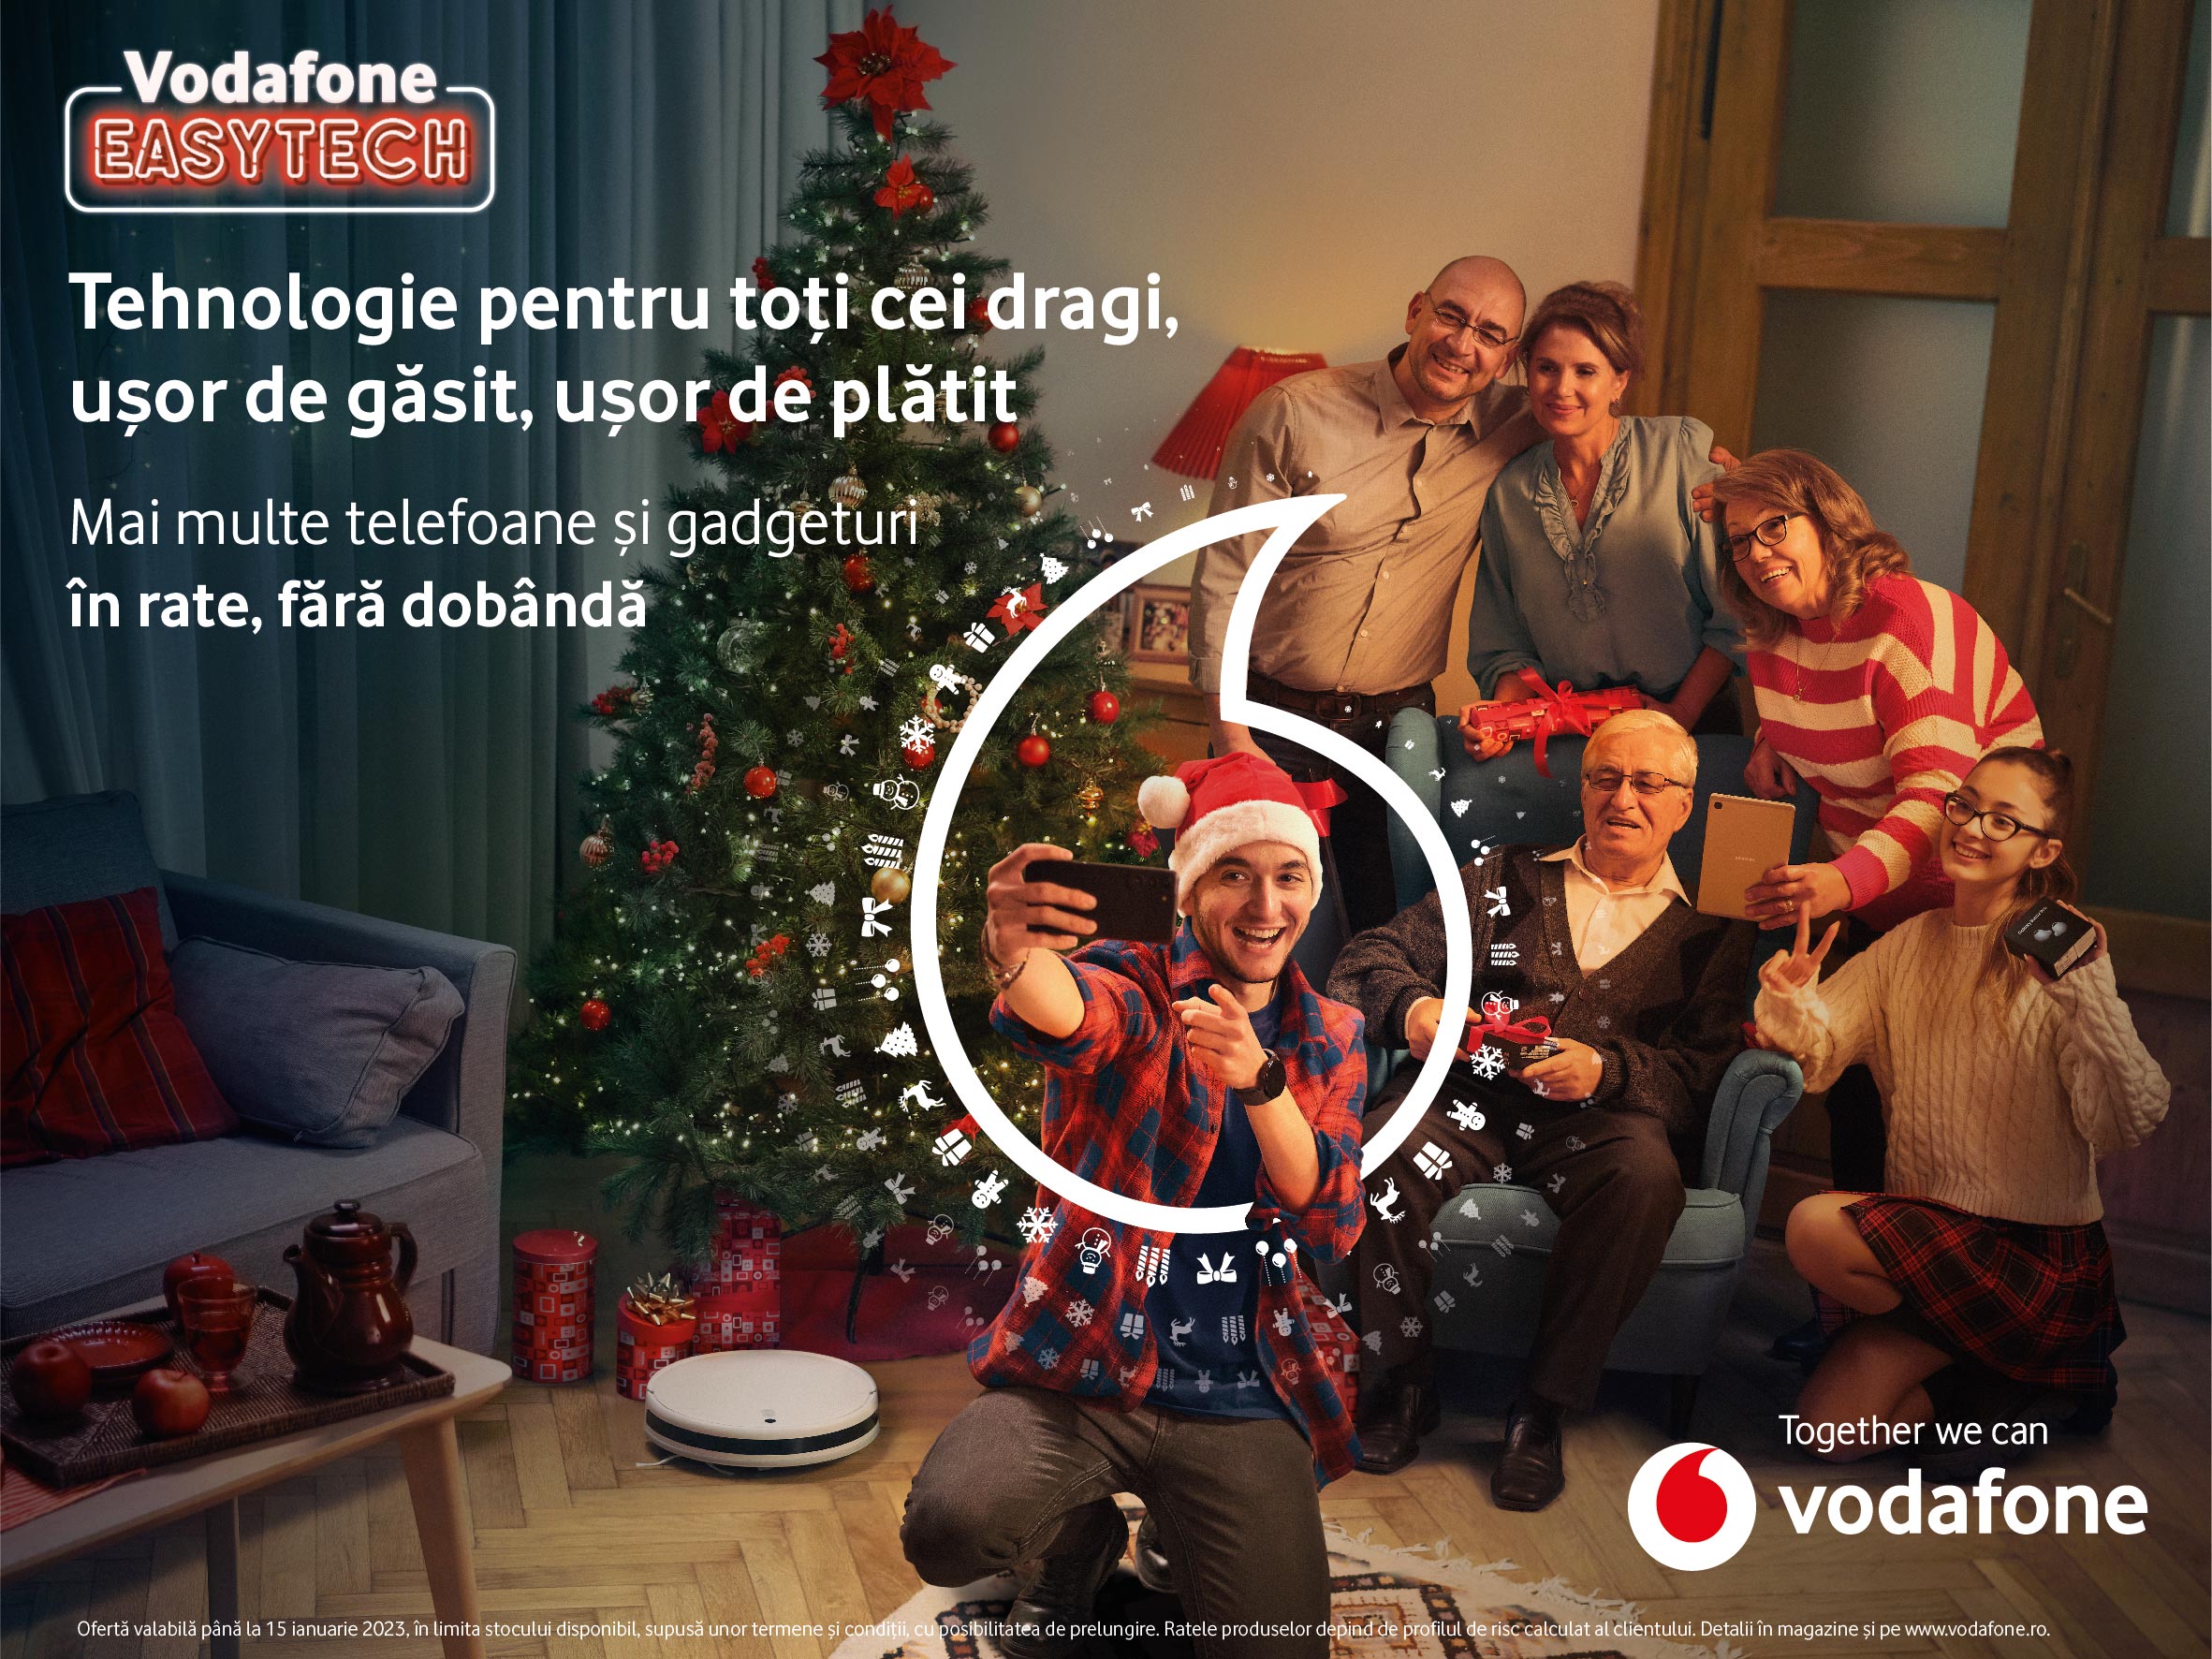 Vodafone EasyTech brings technology to all the loved ones for the Holidays, easy to find, easy to pay